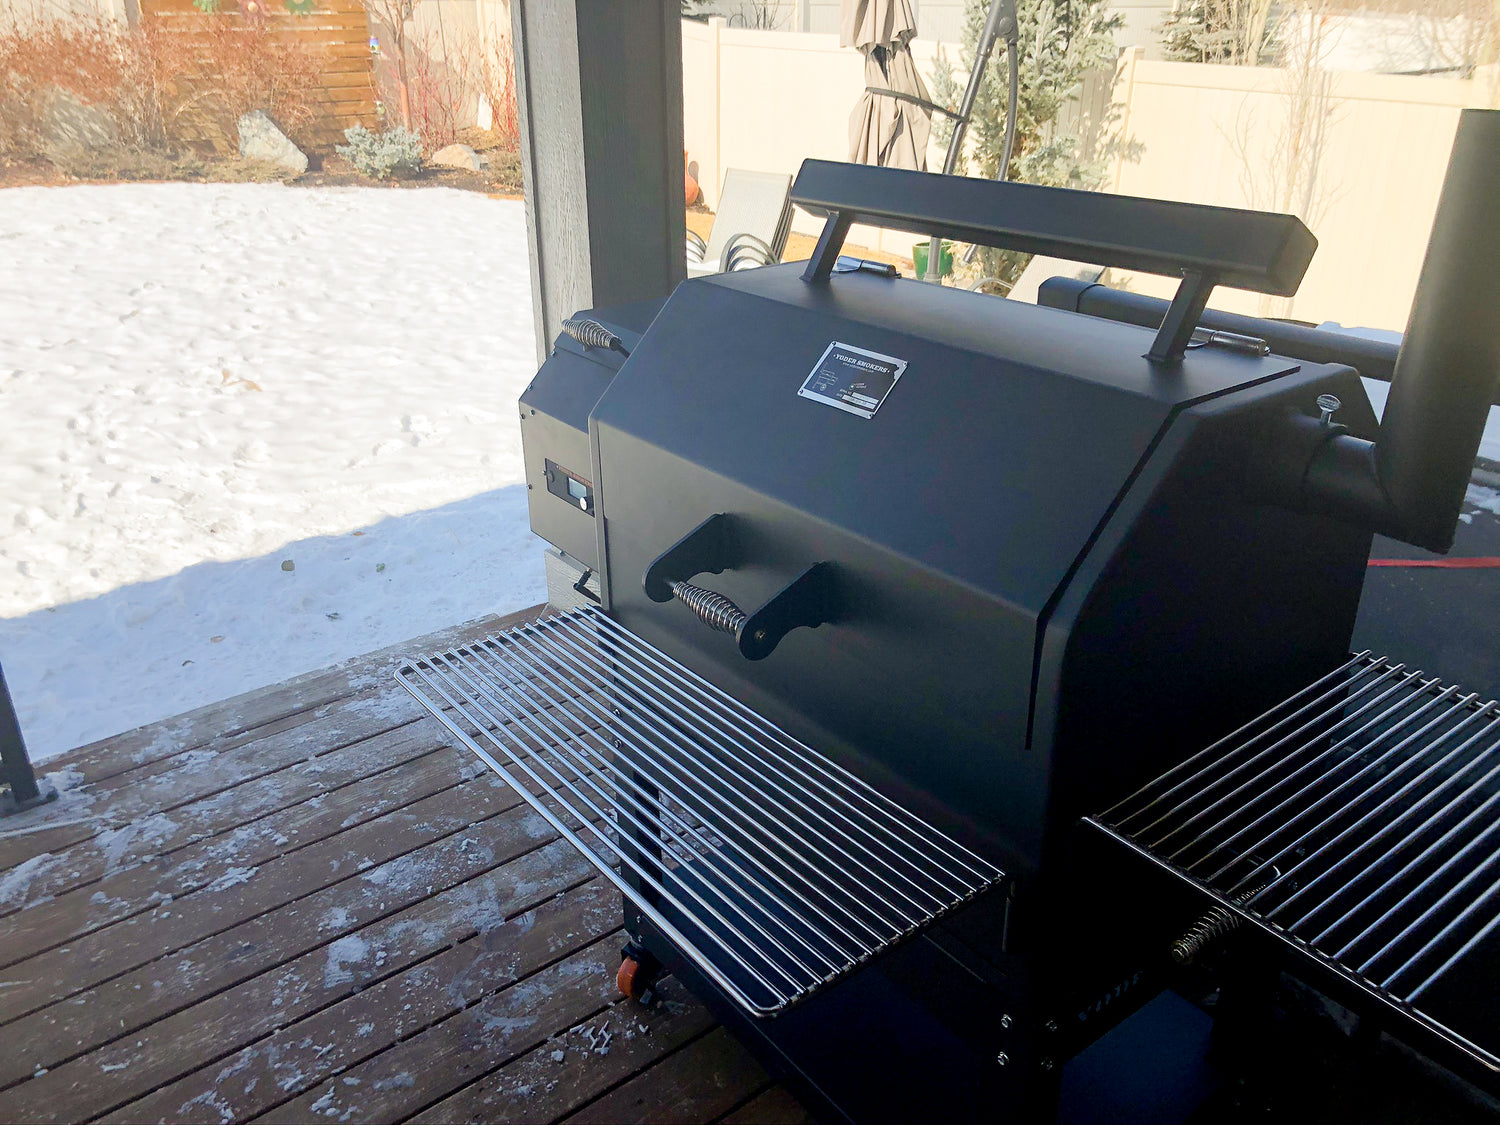 Yoder Standard Pellet Grill YS640s | Yoder smokers are the top of the heap when it comes to competition bbq | Barbecues Galore in Calgary, Burlington, Etobicoke & Oakville